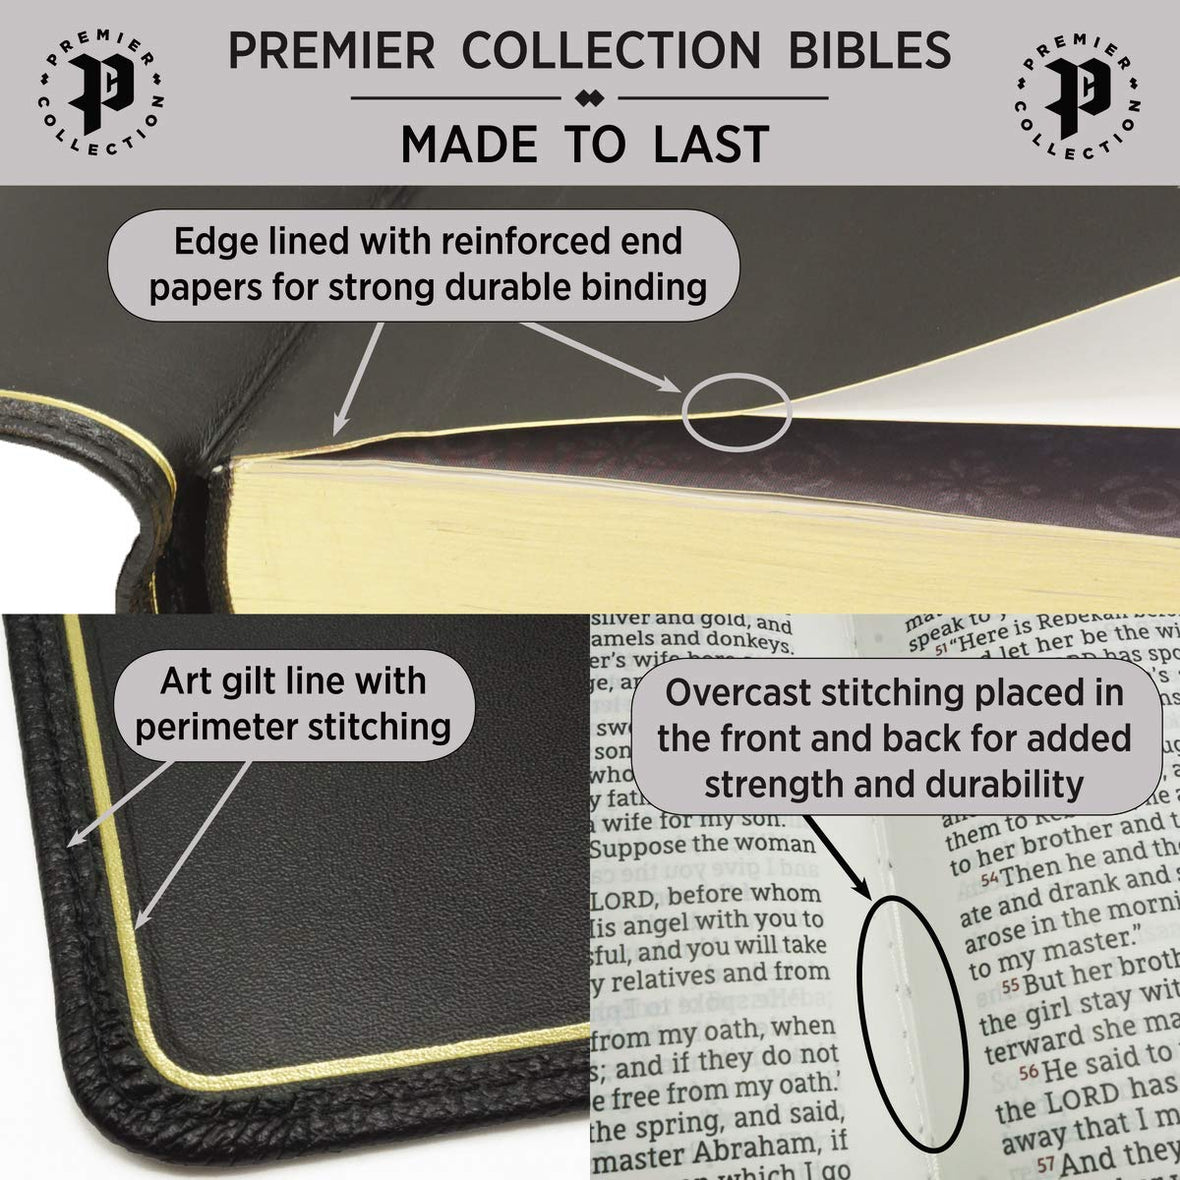 NKJV, End-of-Verse Reference Bible, Personal Size Large Print, Premium Goatskin Leather, Brown, Premier Collection, Red Letter, Comfort Print: Holy Bible, New King James Version